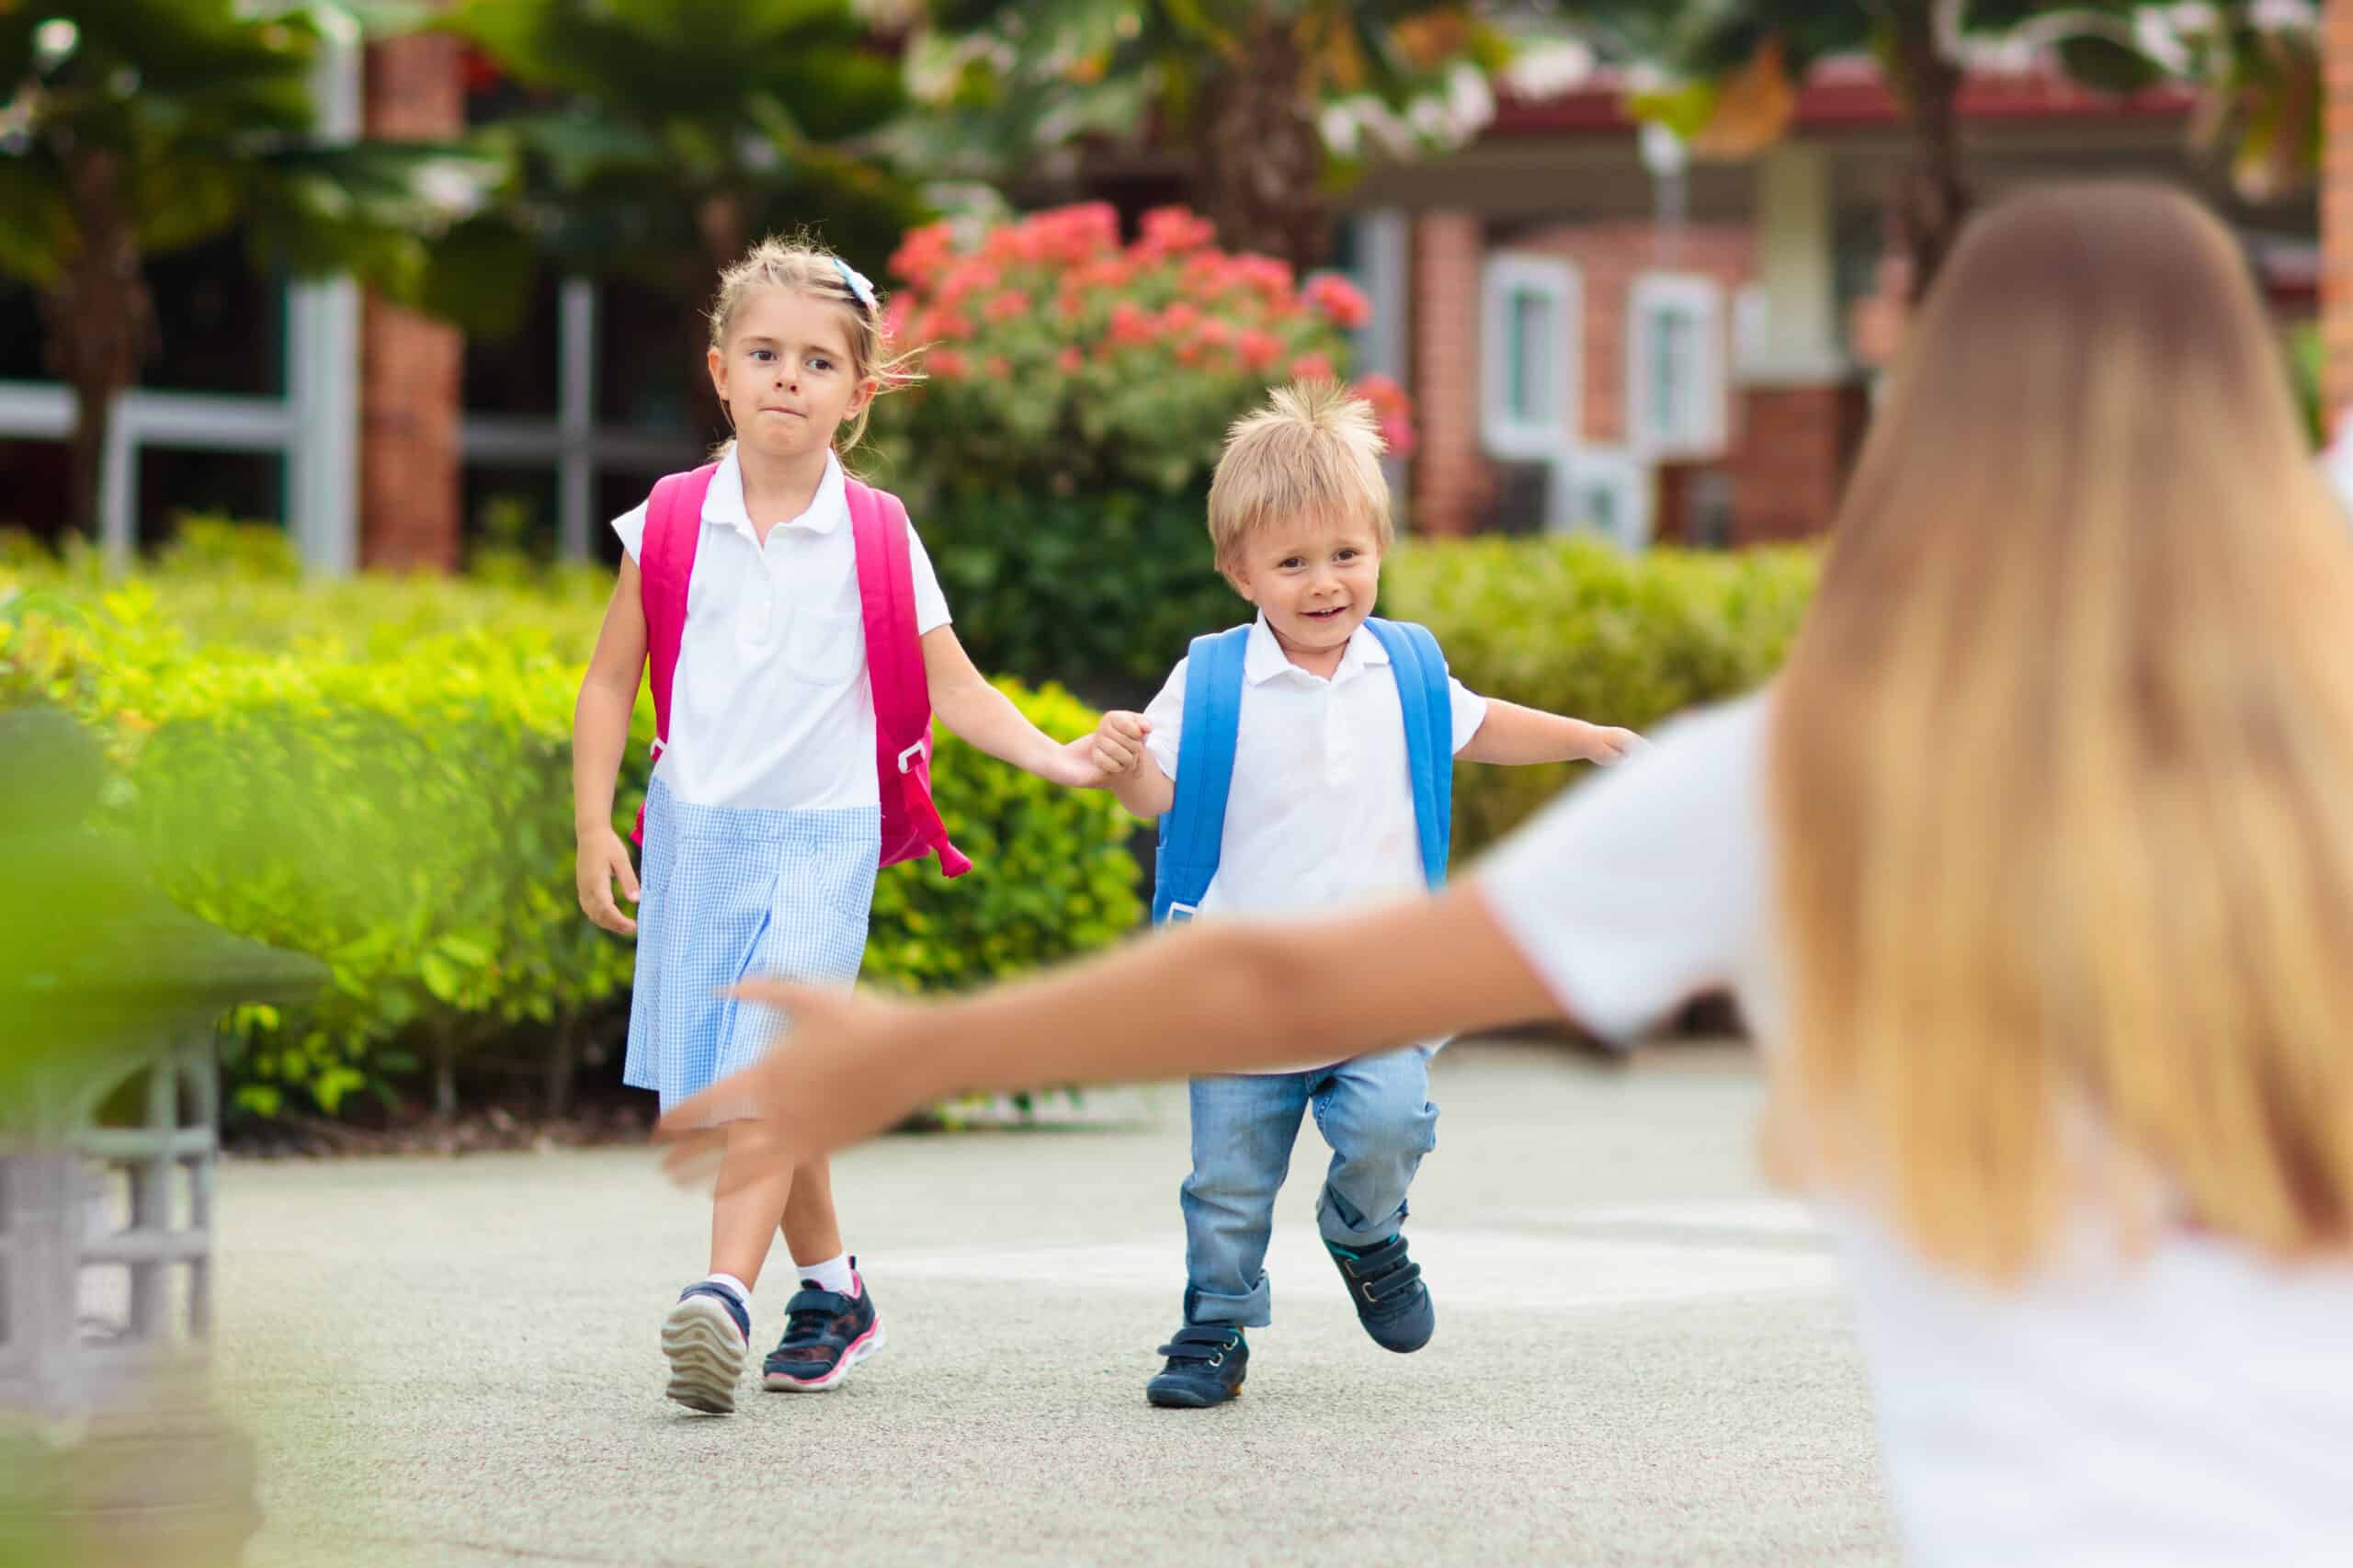 Young children wearing backpacks leaving school and walking towards a woman with outstretched arms.